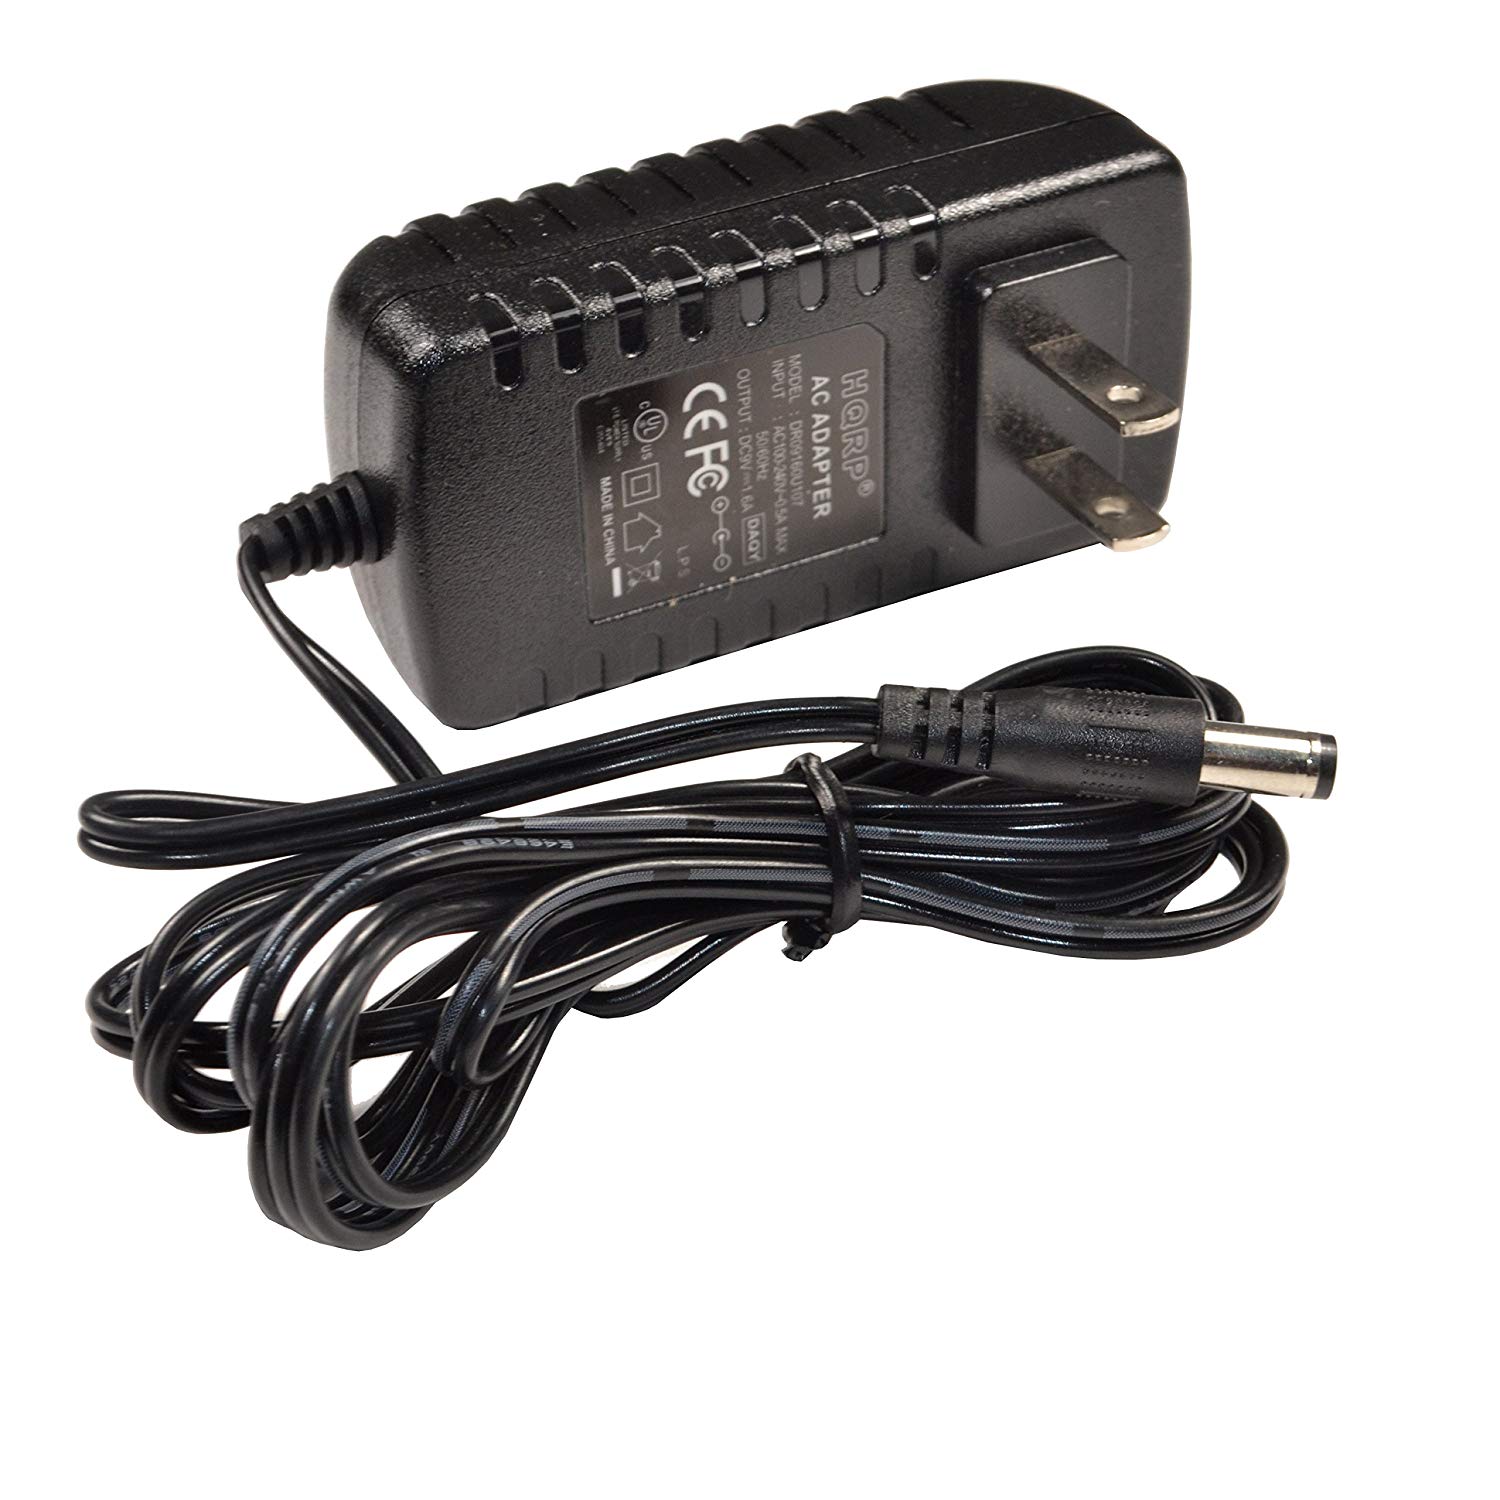 HQRP AC Adapter / Power Cord compatible with Brother P-Touch PT-1830C PT-1830SC PT-1880 PT-1900 PT-1910 Labeling System UL Listed